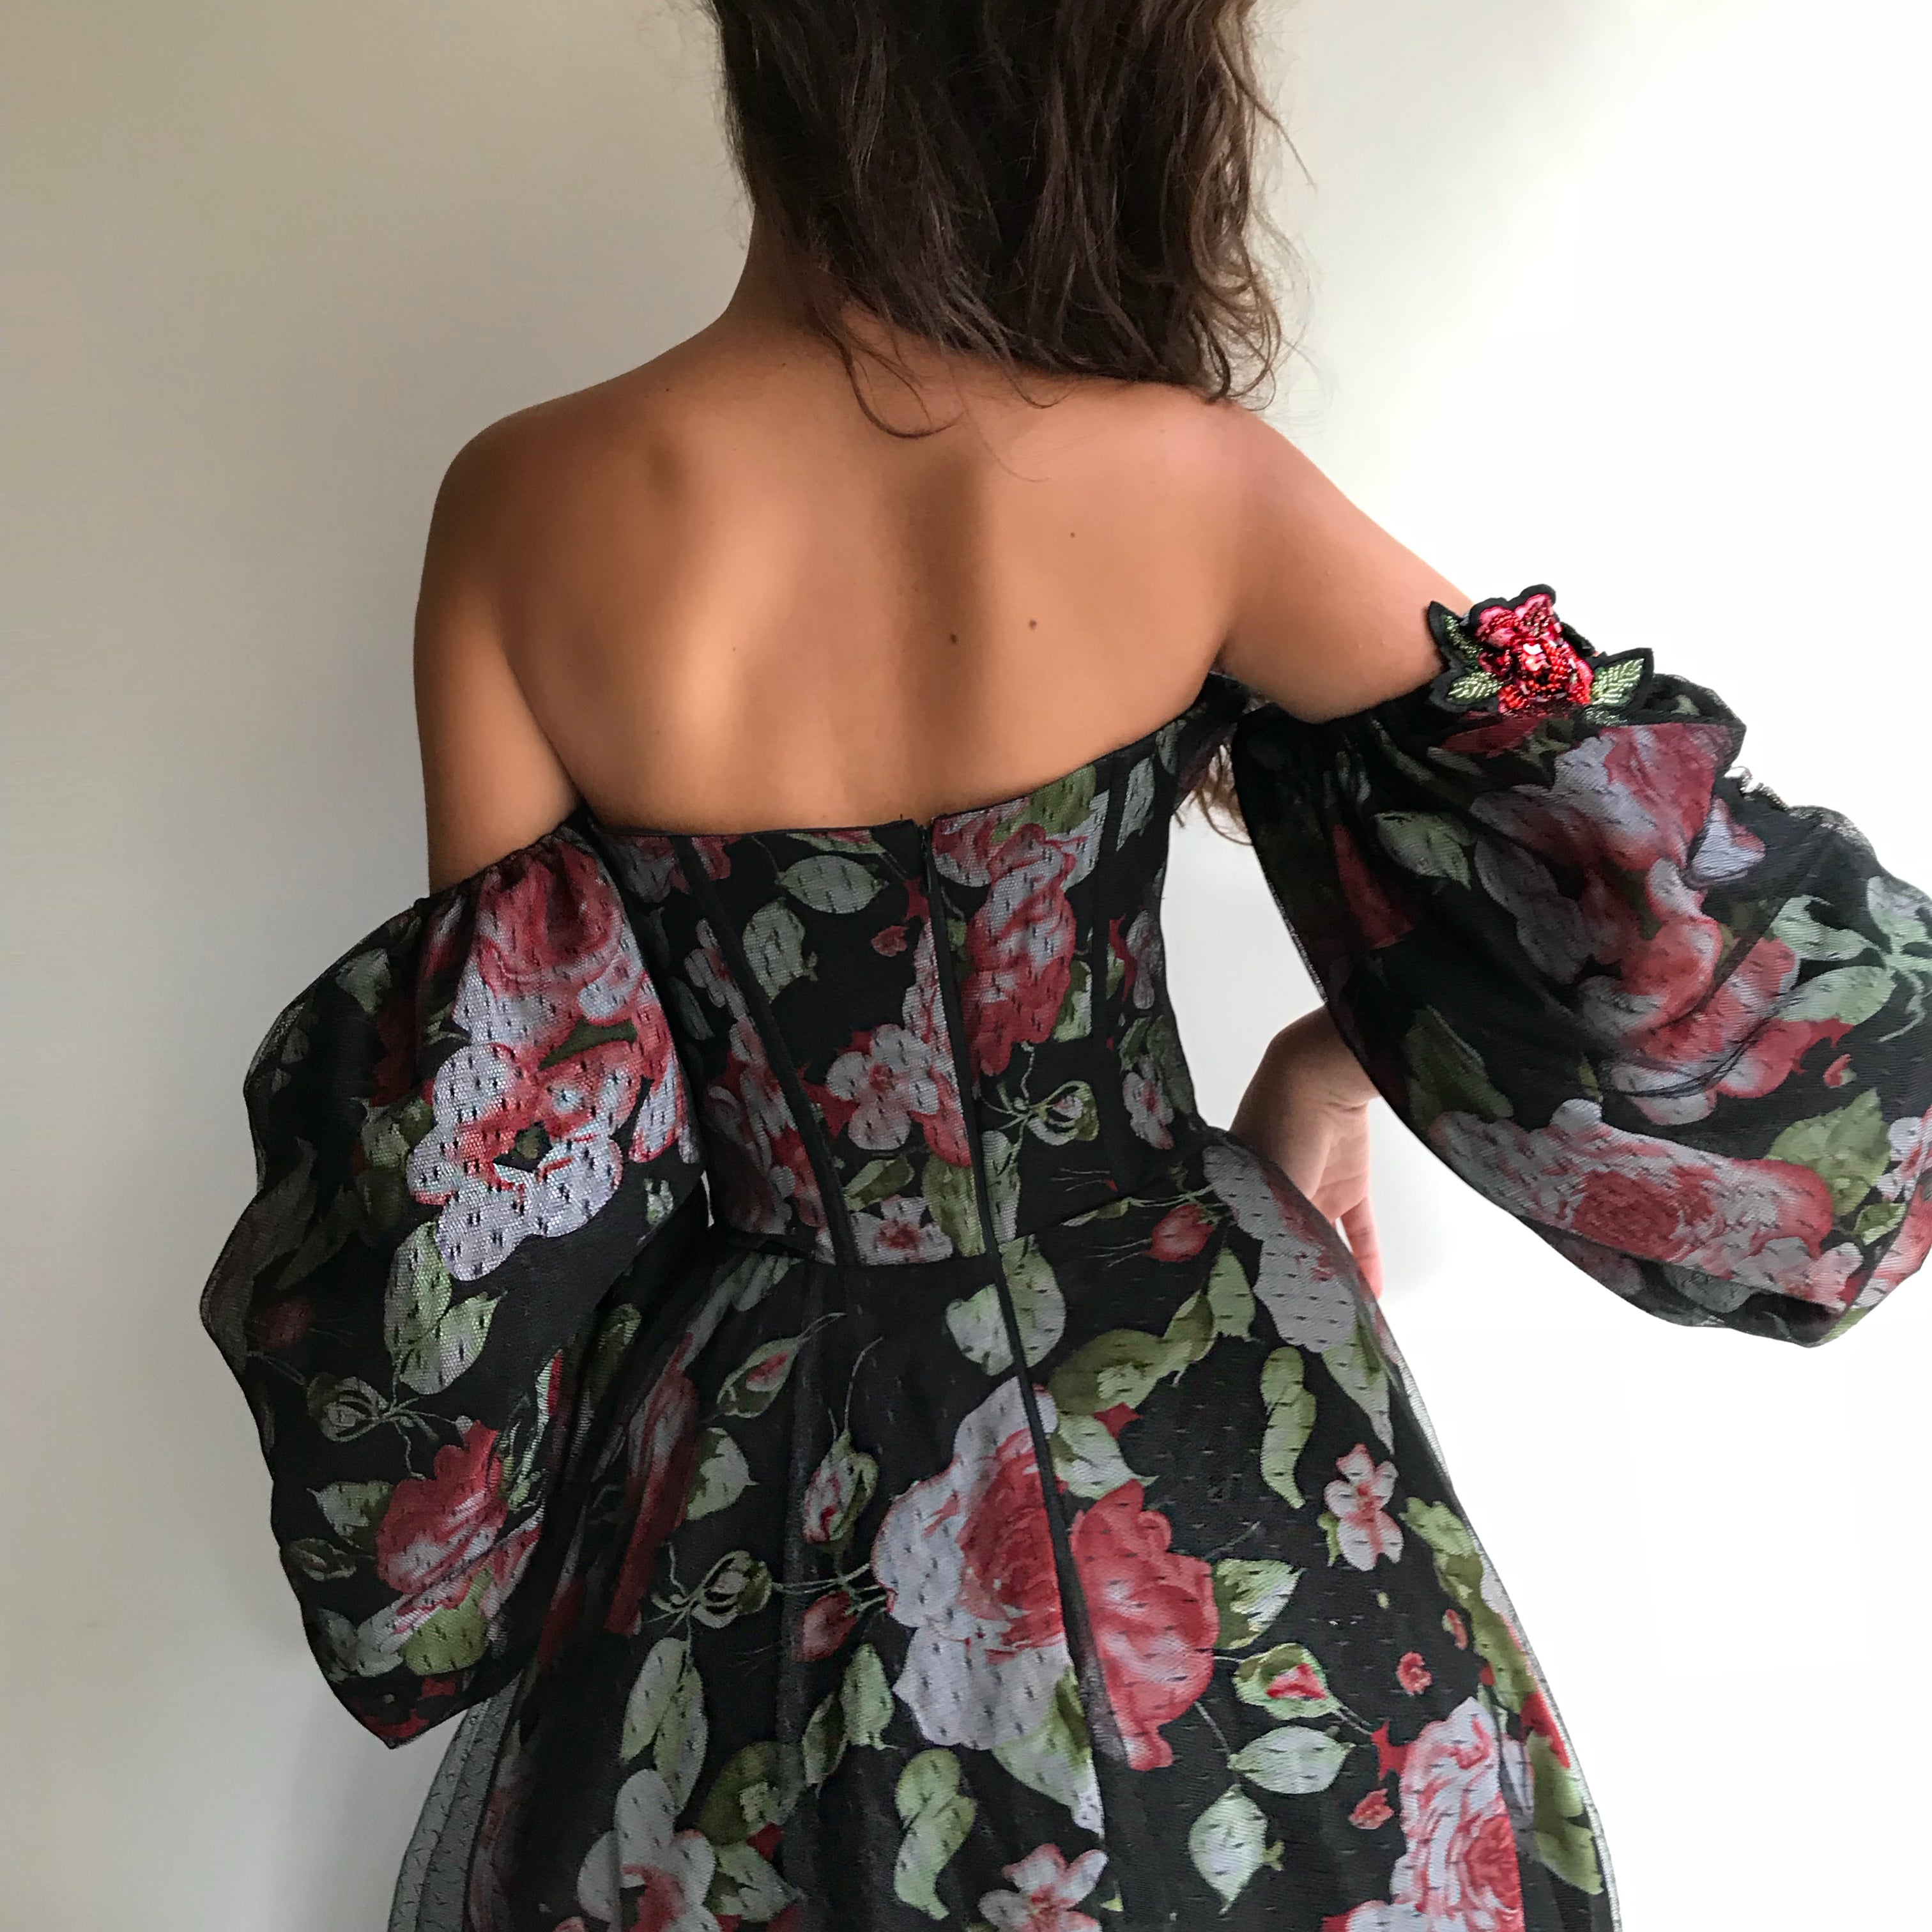 Black A-Line dress with off the shoulder sleeves, embroidery and printed flowers